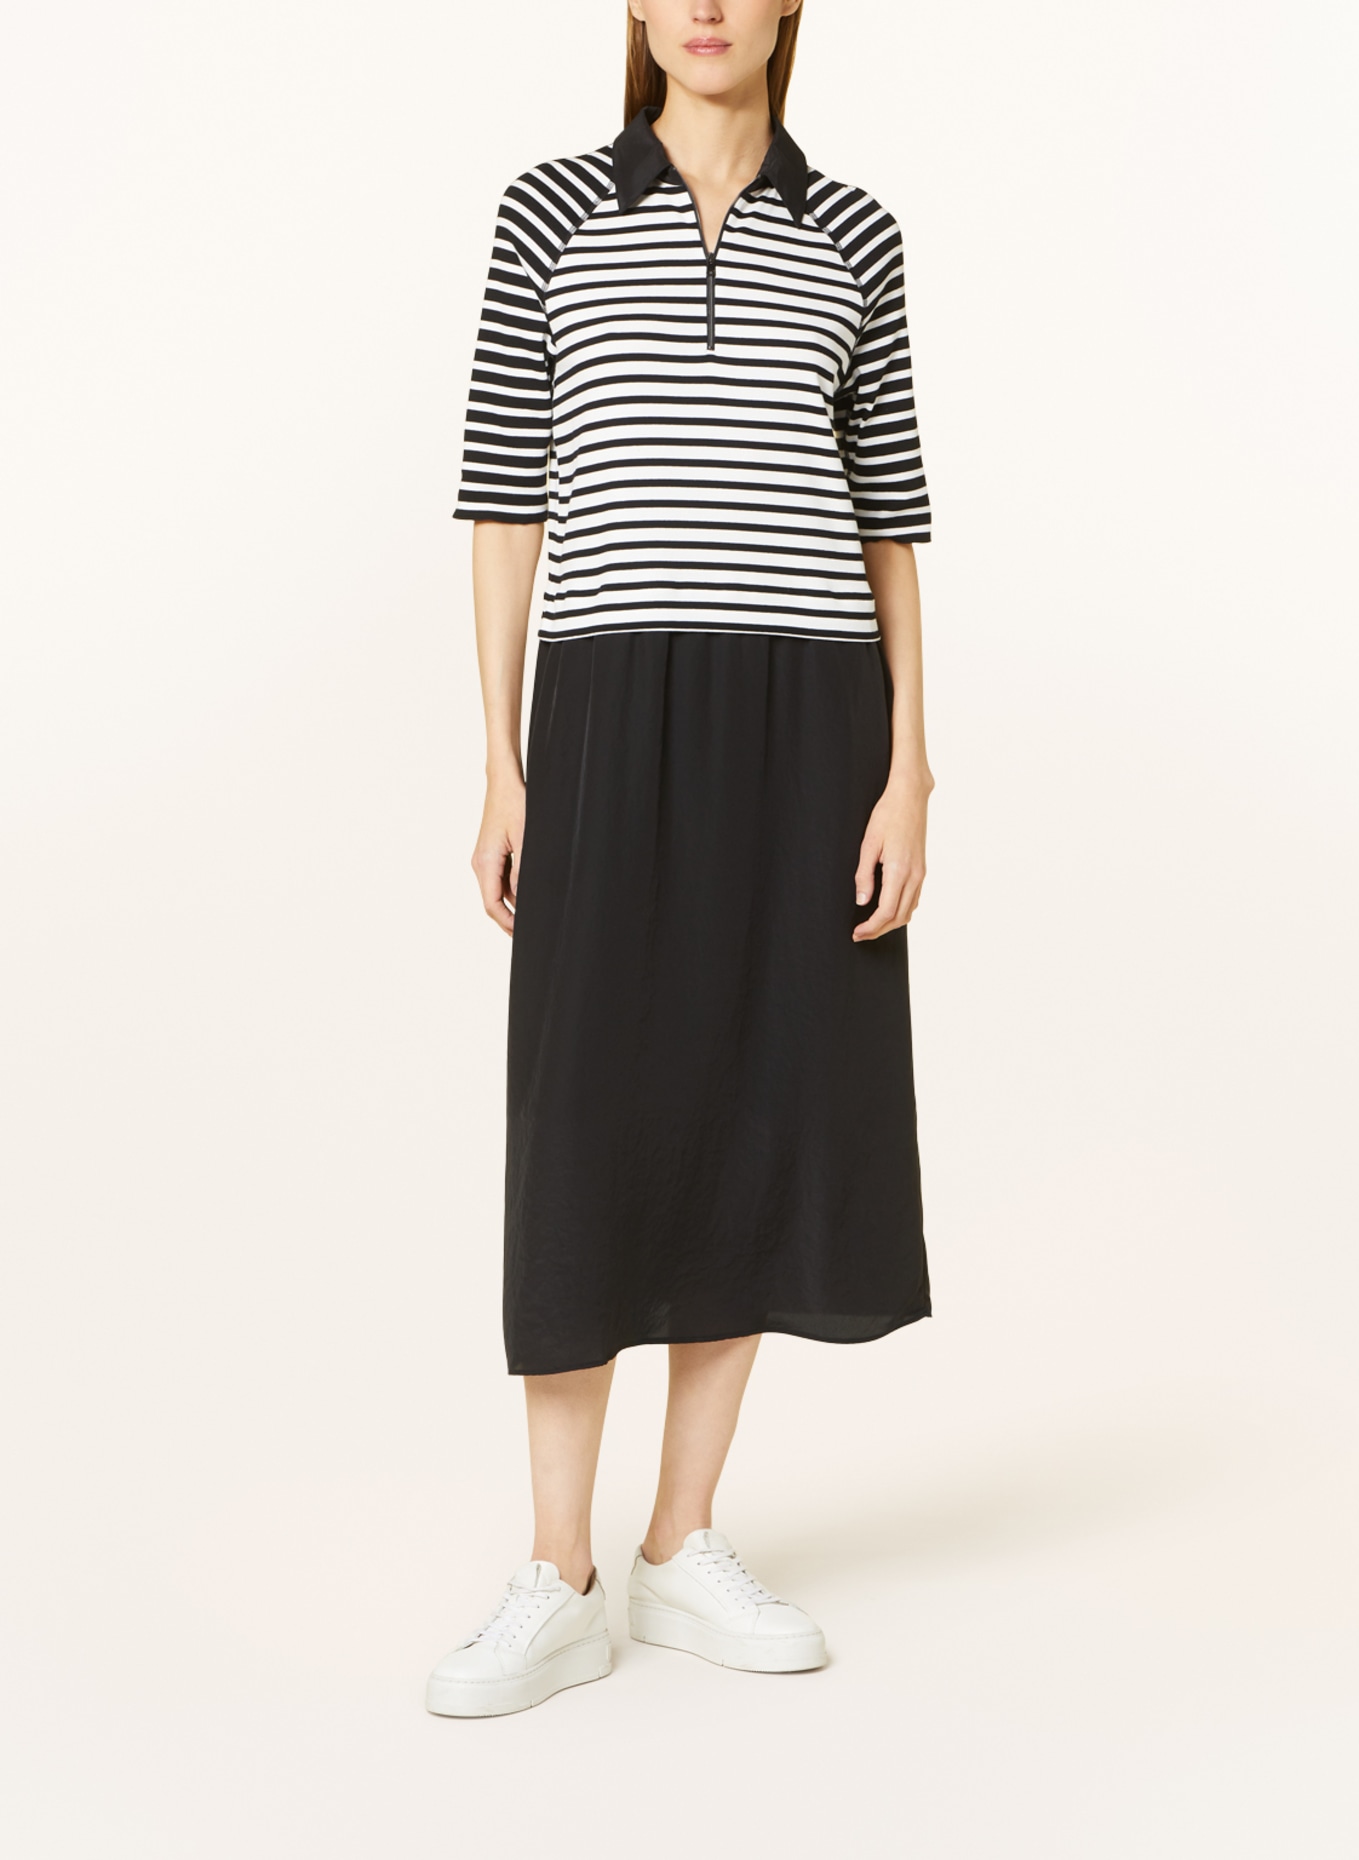 MARC CAIN Jersey polo dress in mixed materials, Color: 910 black and white (Image 2)